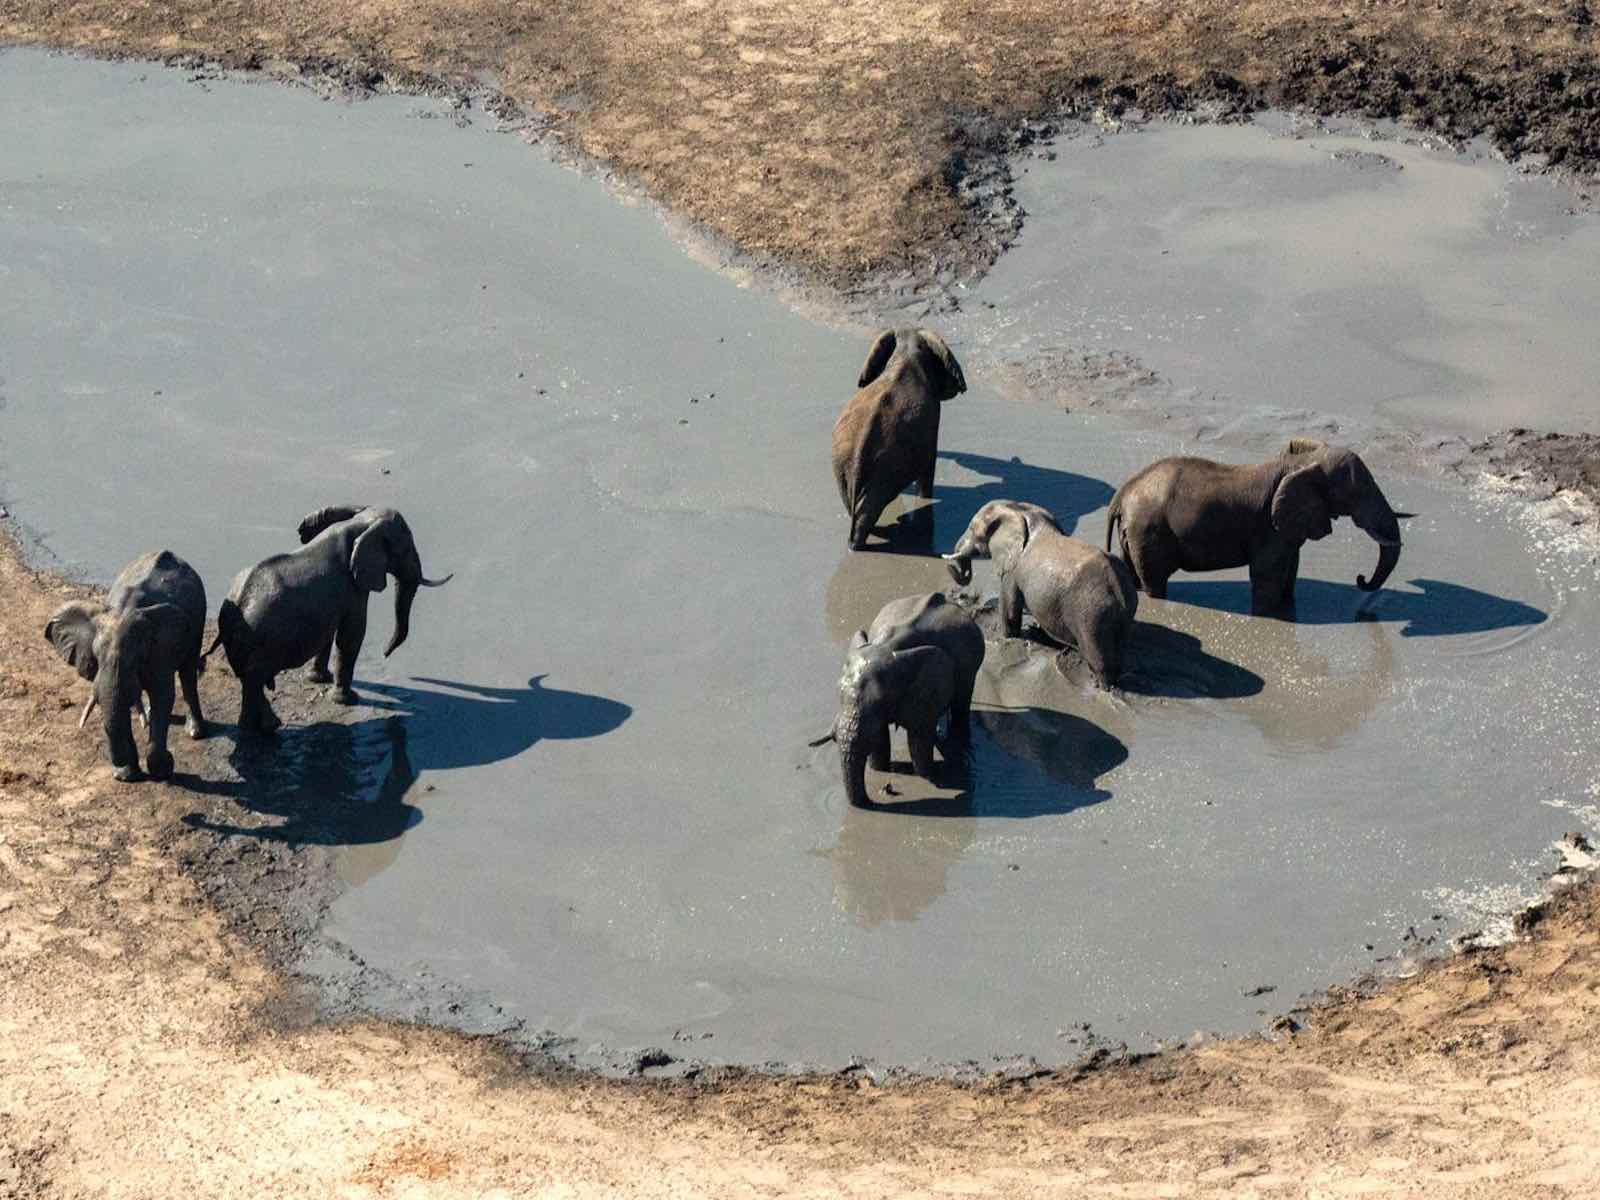 A group of six elephants wading in and drinking from a dam.